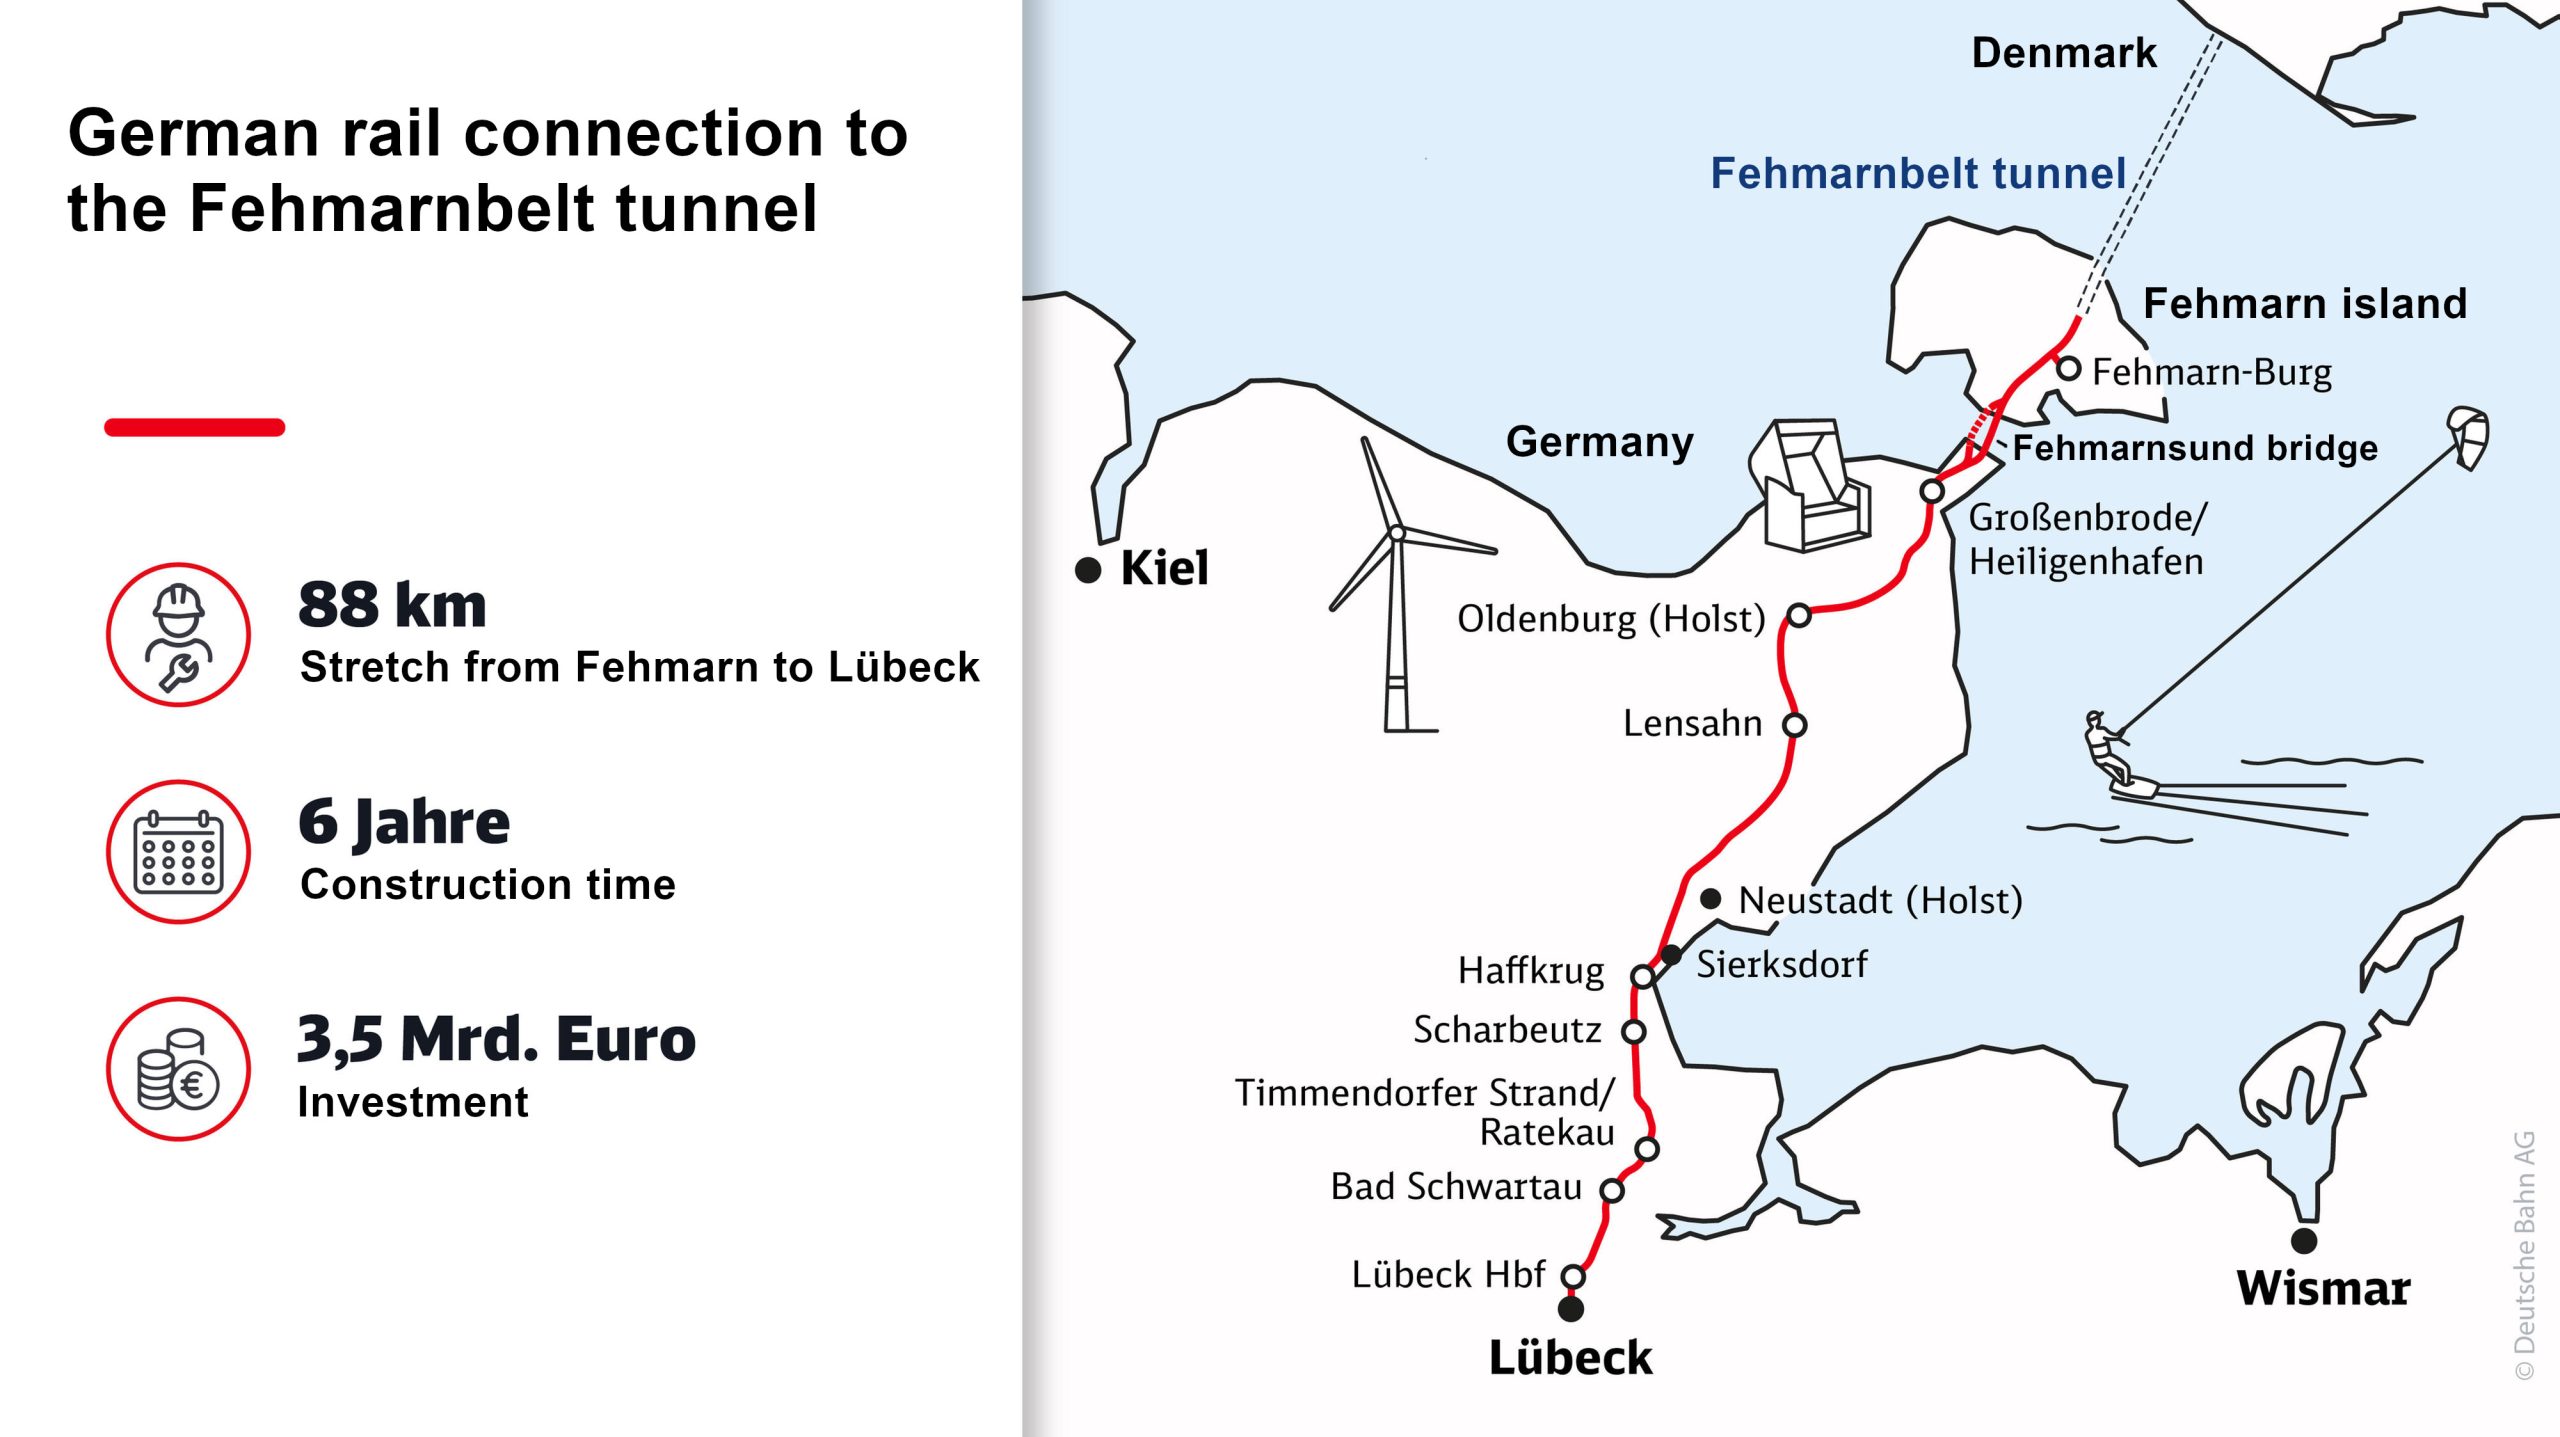 The German rail connection to the Fehmarnbelt tunnel (image: DB, added translations)